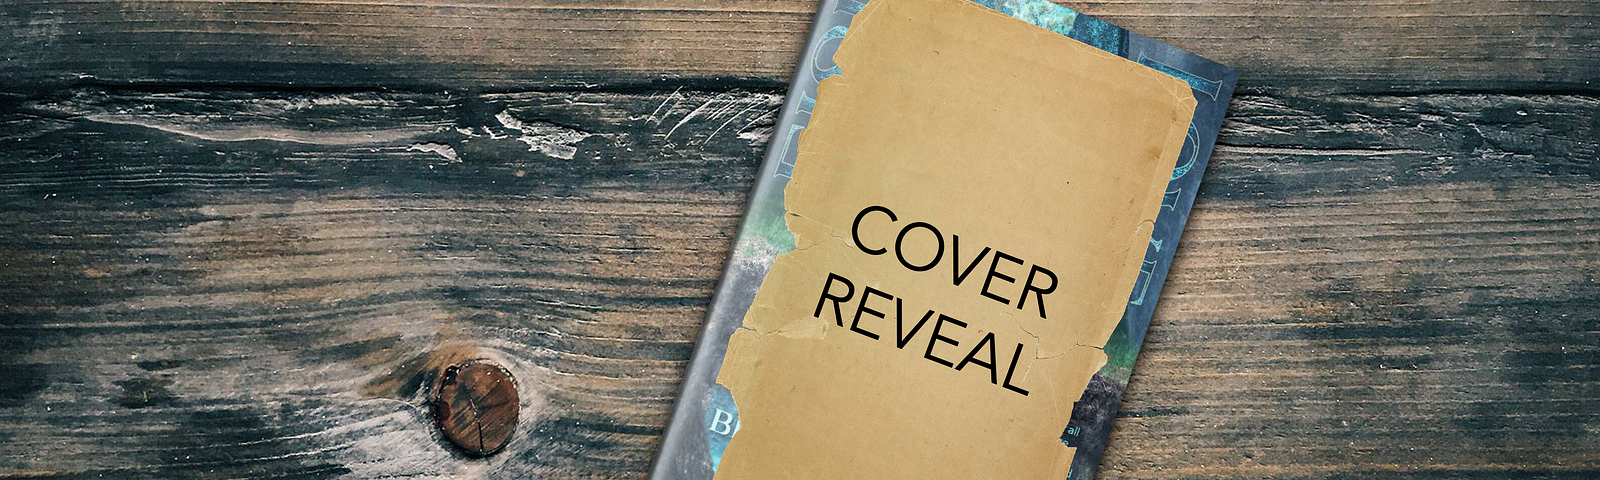 A book sitting on a wooden table. The cover of the book is covered with a piece of brown paper featuring the words “Cover Reveal.” The edges of the book cover can be seen around the edges of the paper, and the cover color is blue-green.